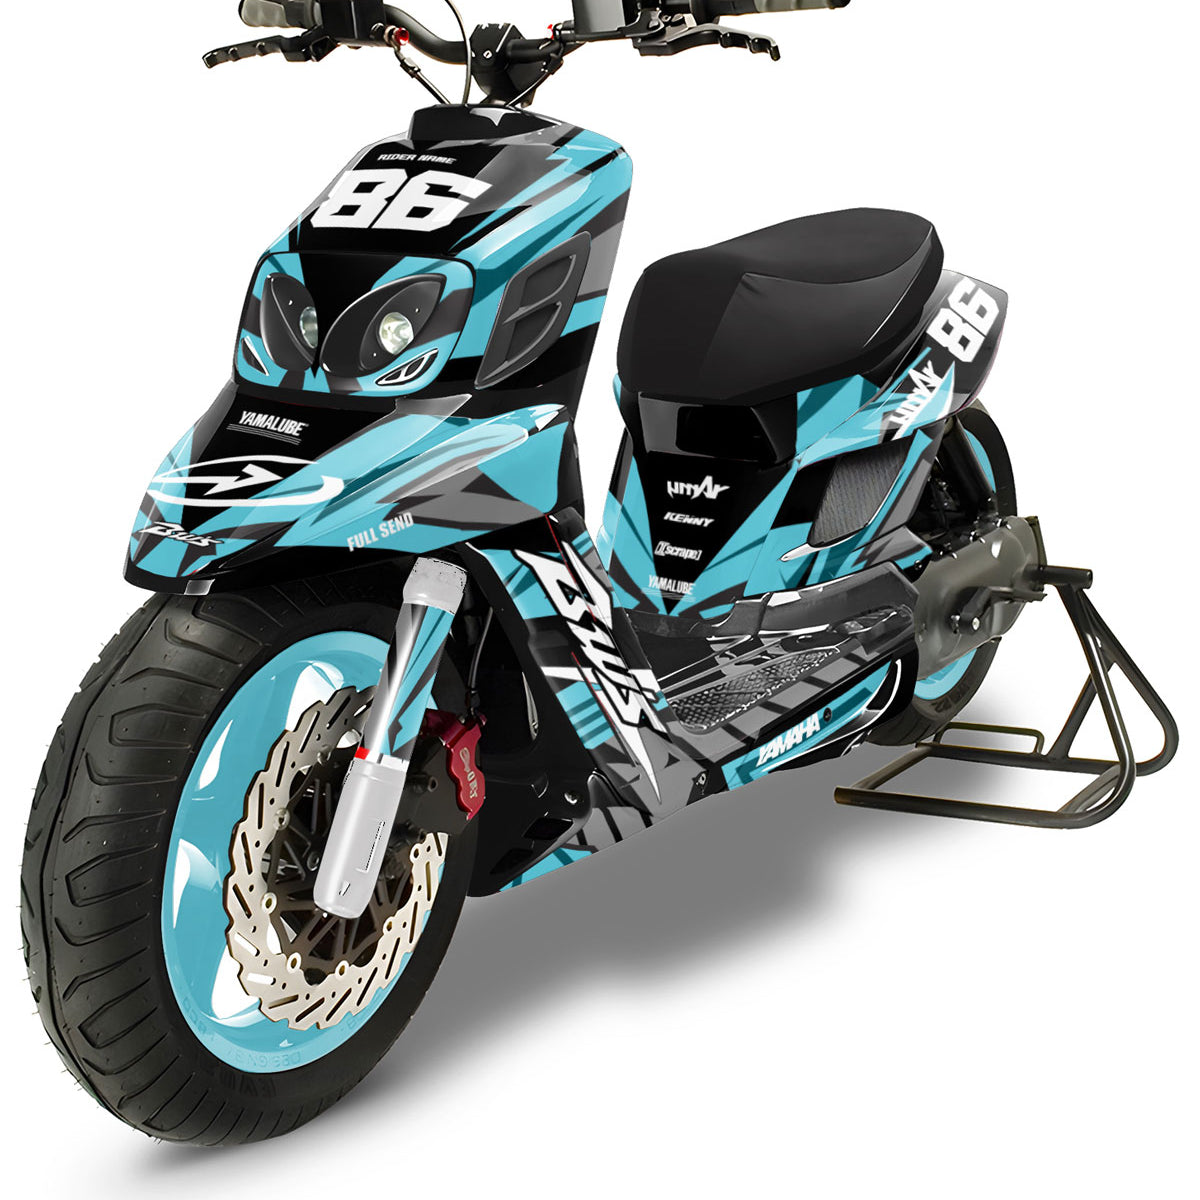 Graphic decals MBK Booster RX BCD / Yamaha BW's Frost Racing